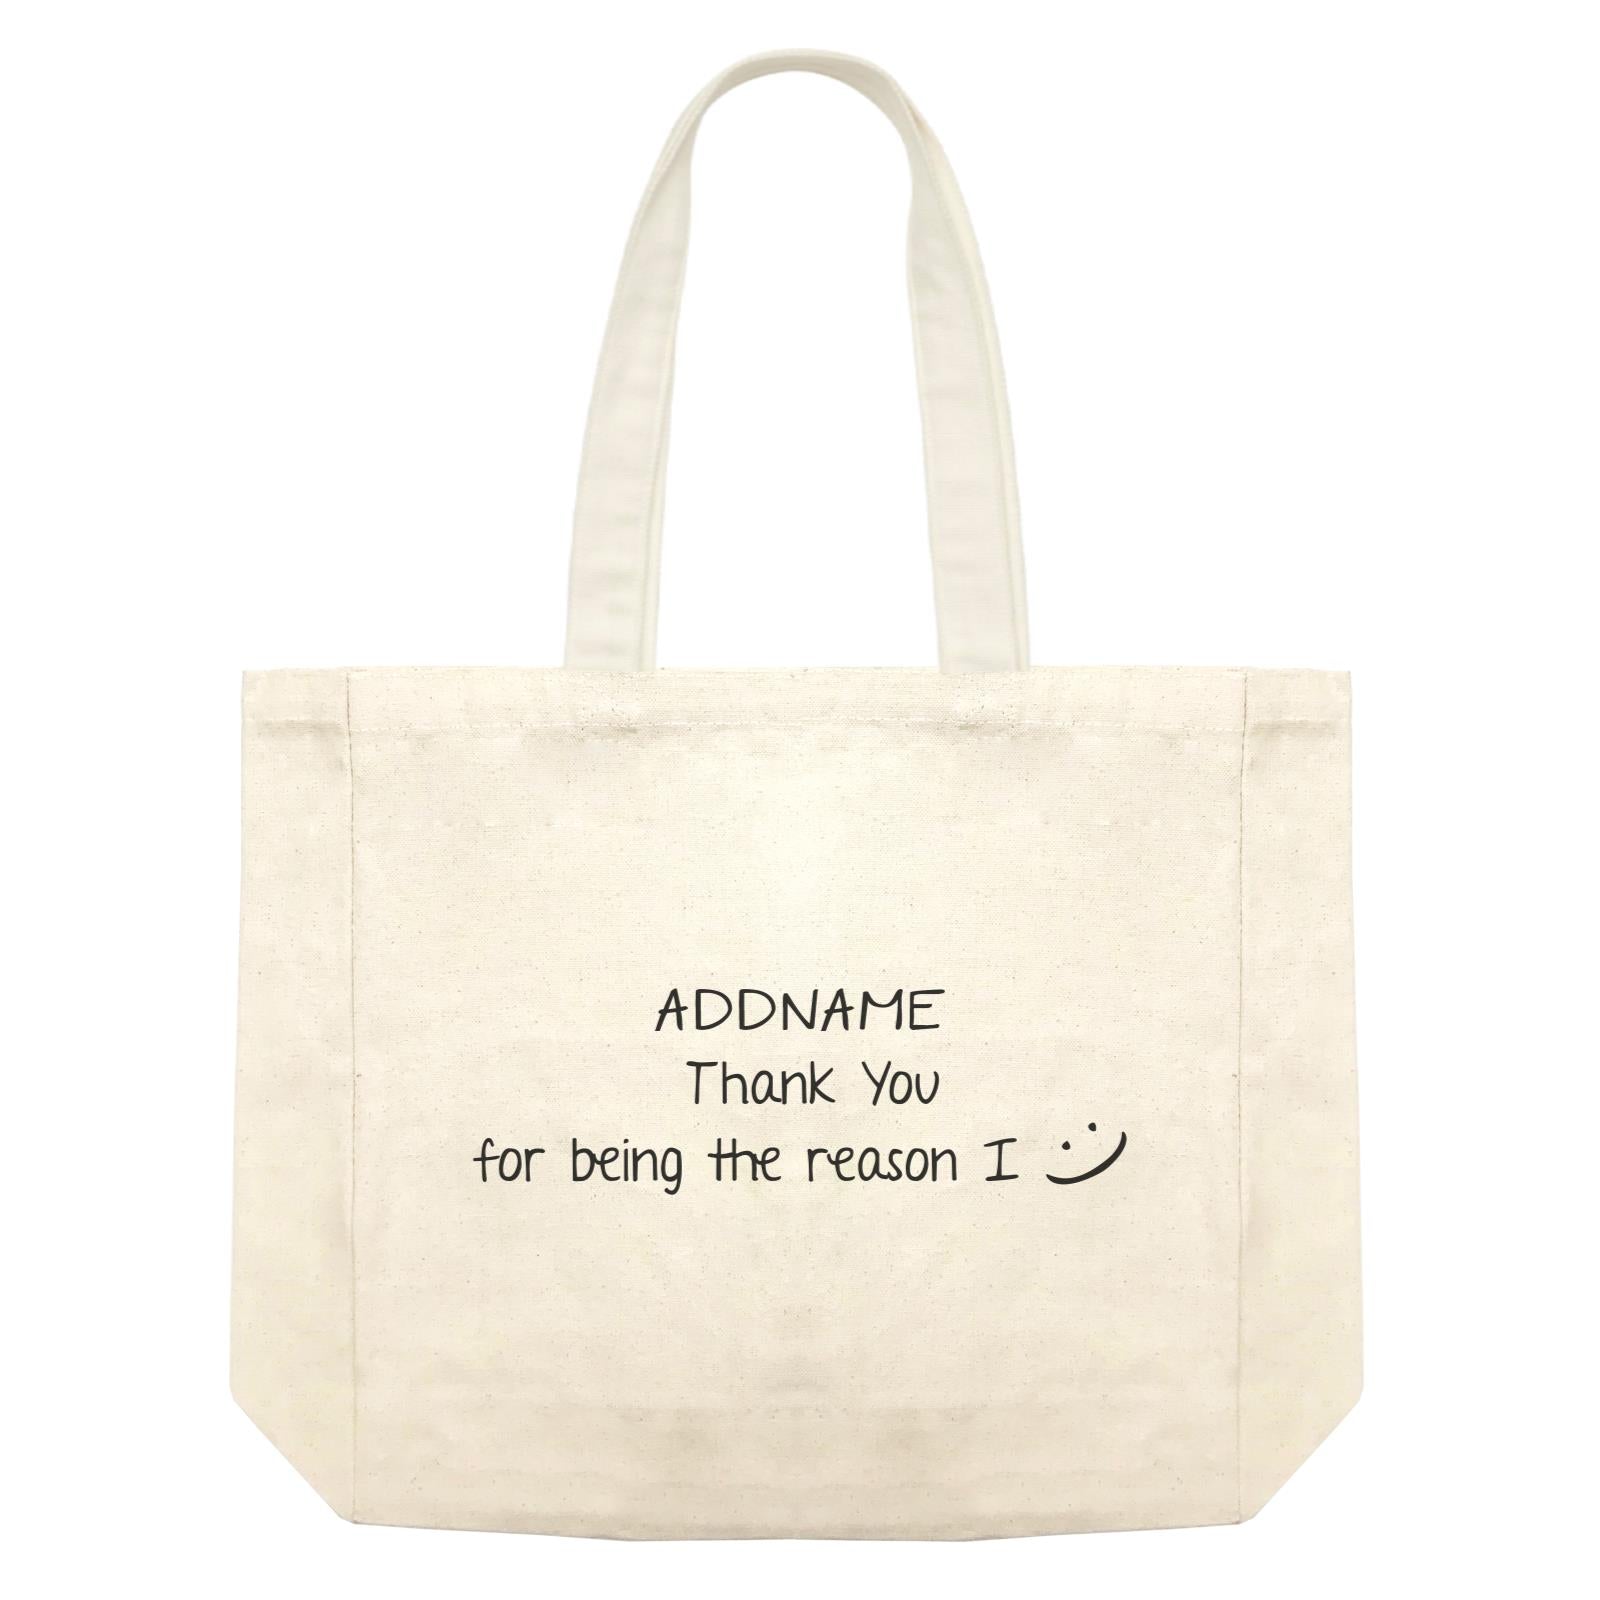 Best Friends Quotes Addname Thank You For Being The Reason I Smiley Face Shopping Bag